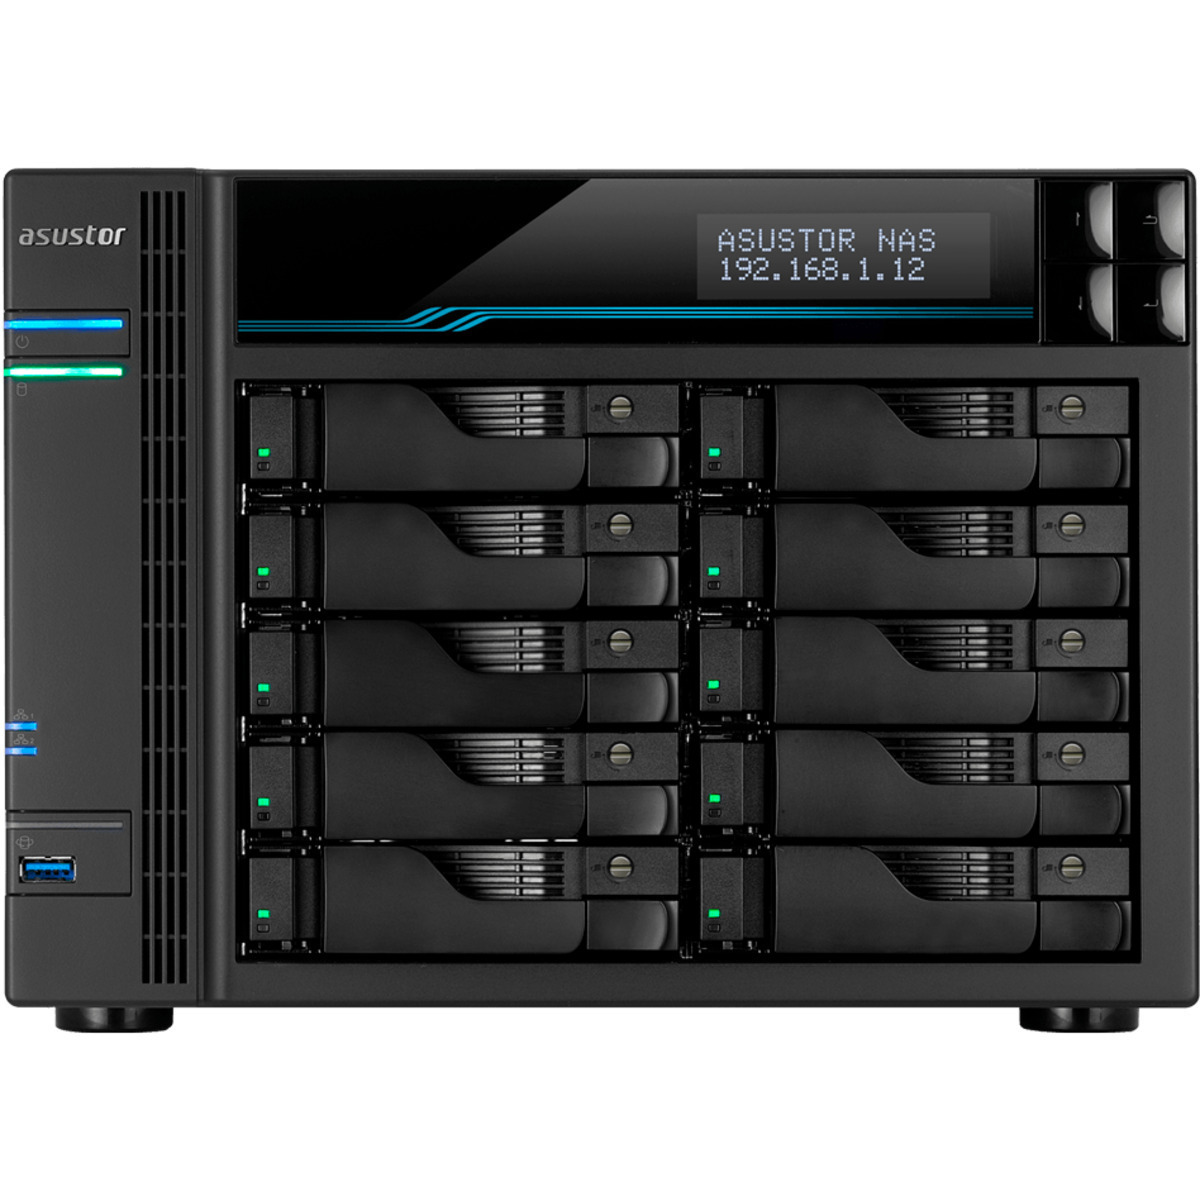 ASUSTOR AS7110T NAS - Network Attached Storage Device Burn-In Tested Configurations